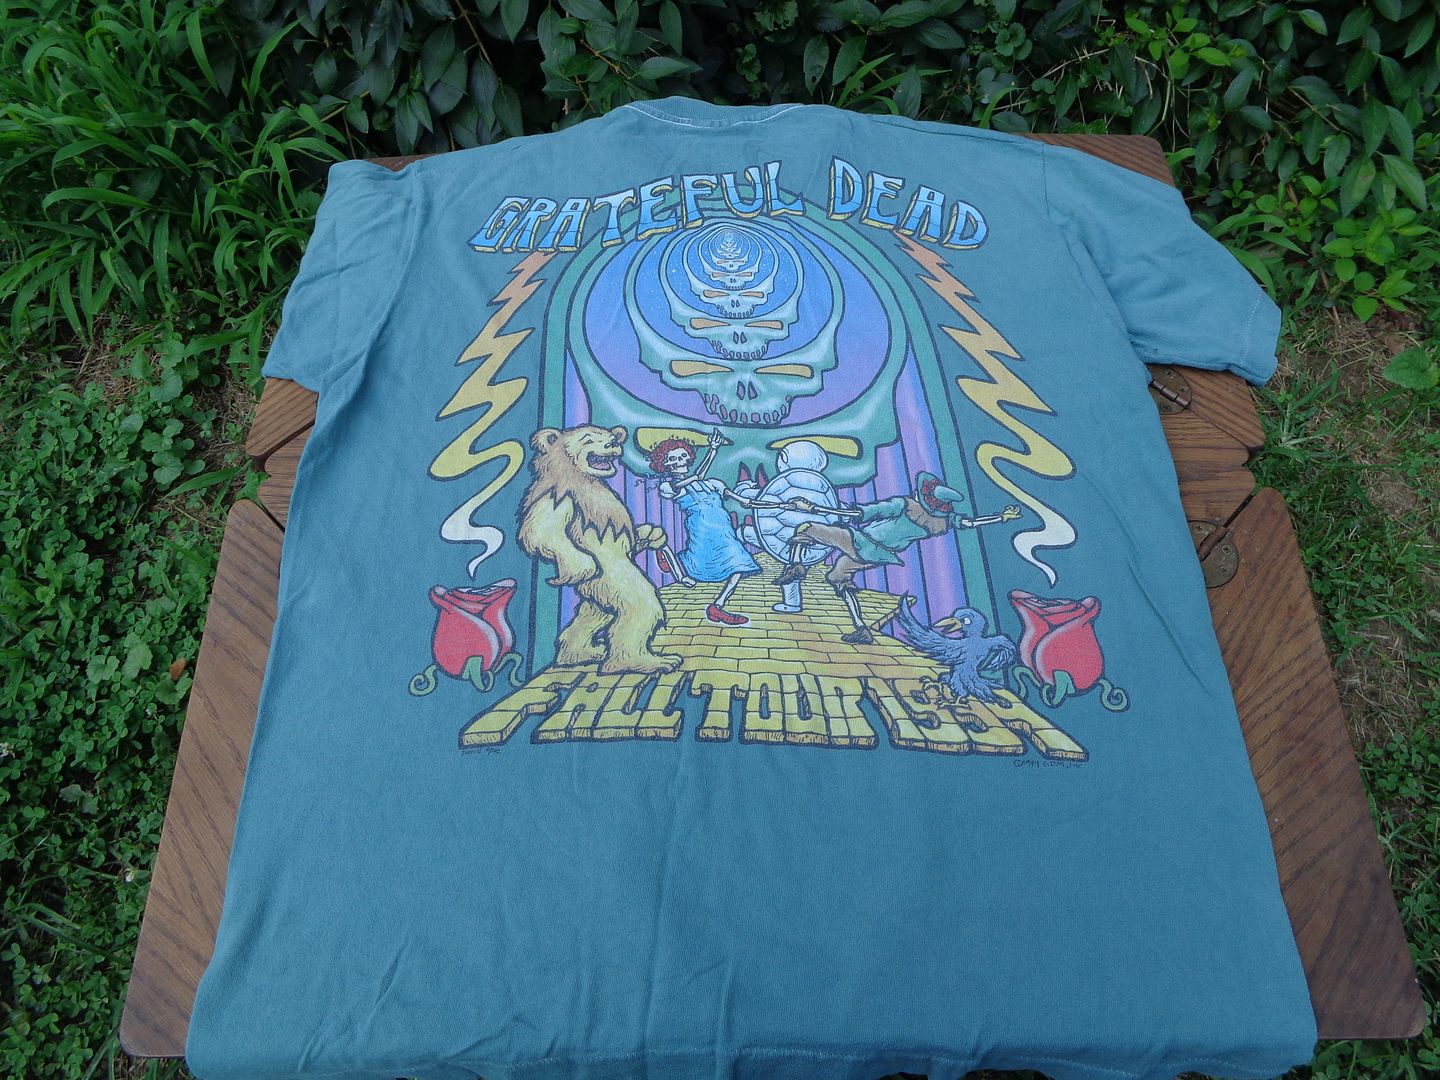 ORIGINAL VINTAGE CONCERT T-SHIRTS! From THE GRATEFUL DEAD and THE OTHER ...